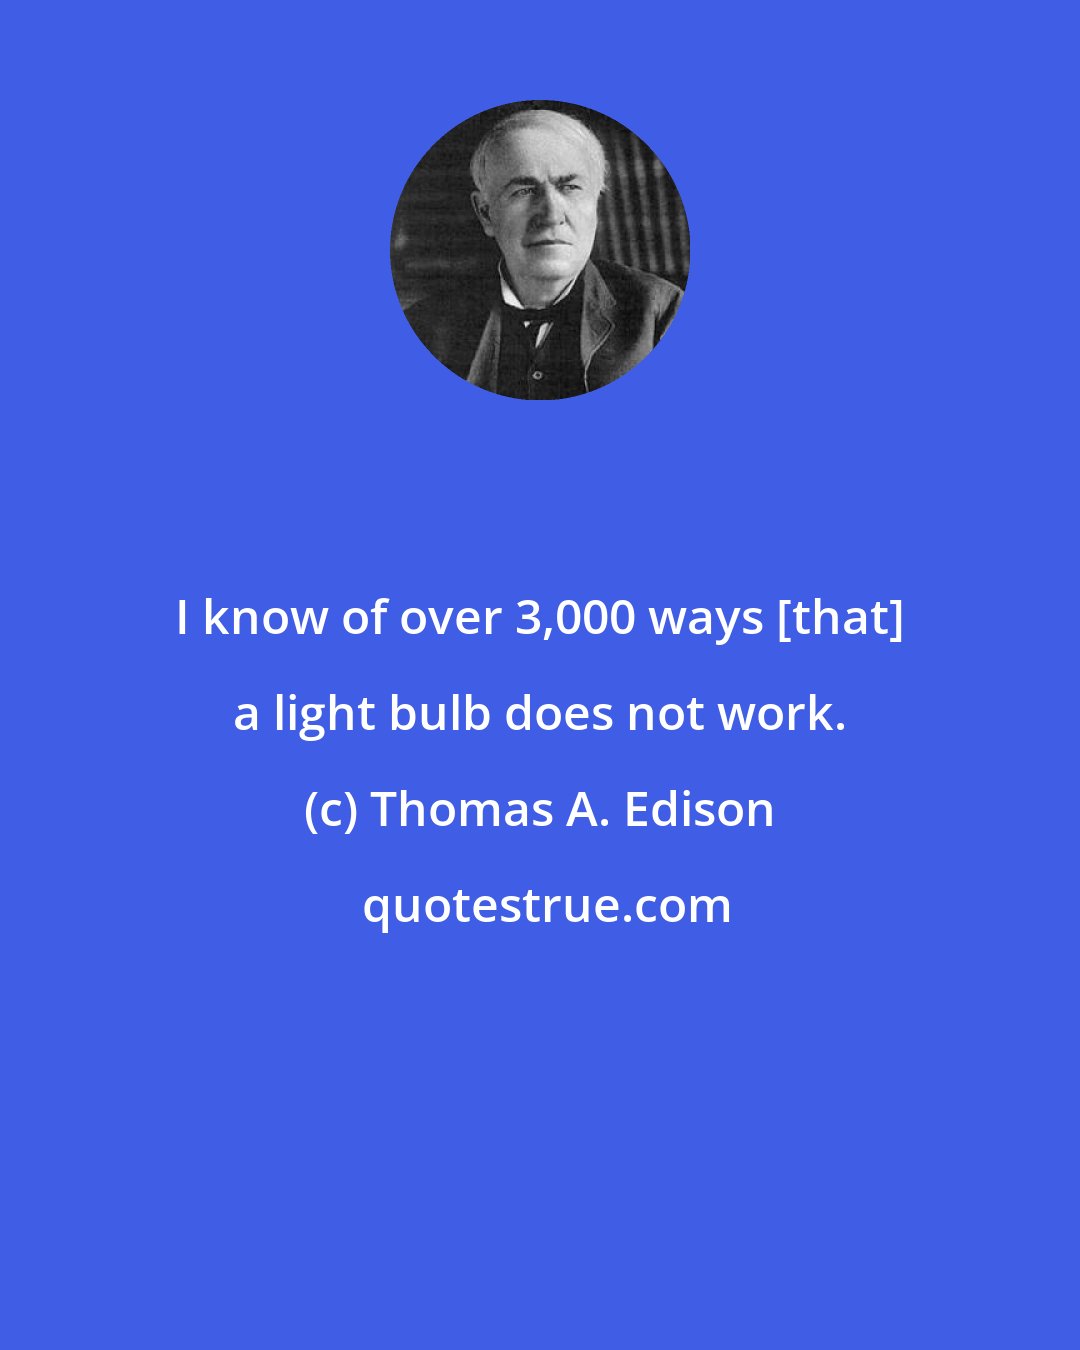 Thomas A. Edison: I know of over 3,000 ways [that] a light bulb does not work.